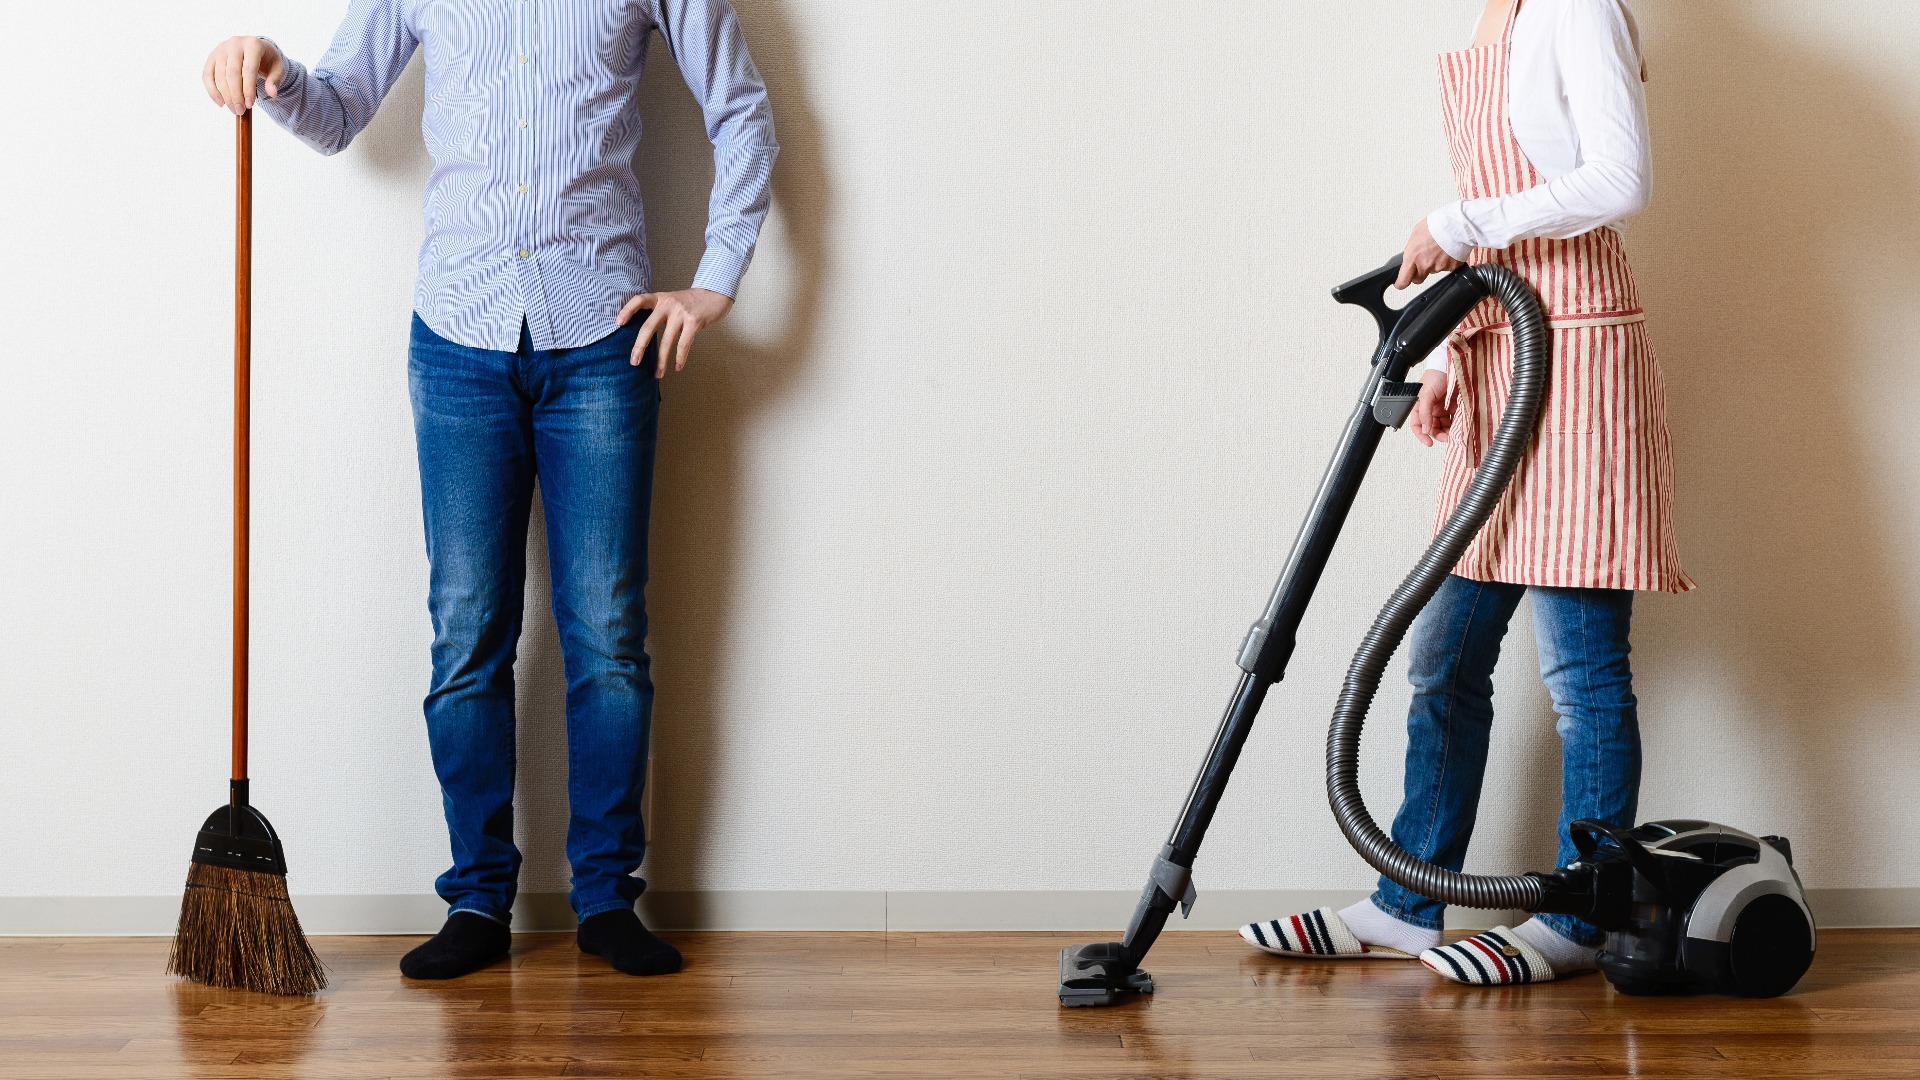 A couple, one holding a broom, and the other stood away, holding a hoover.